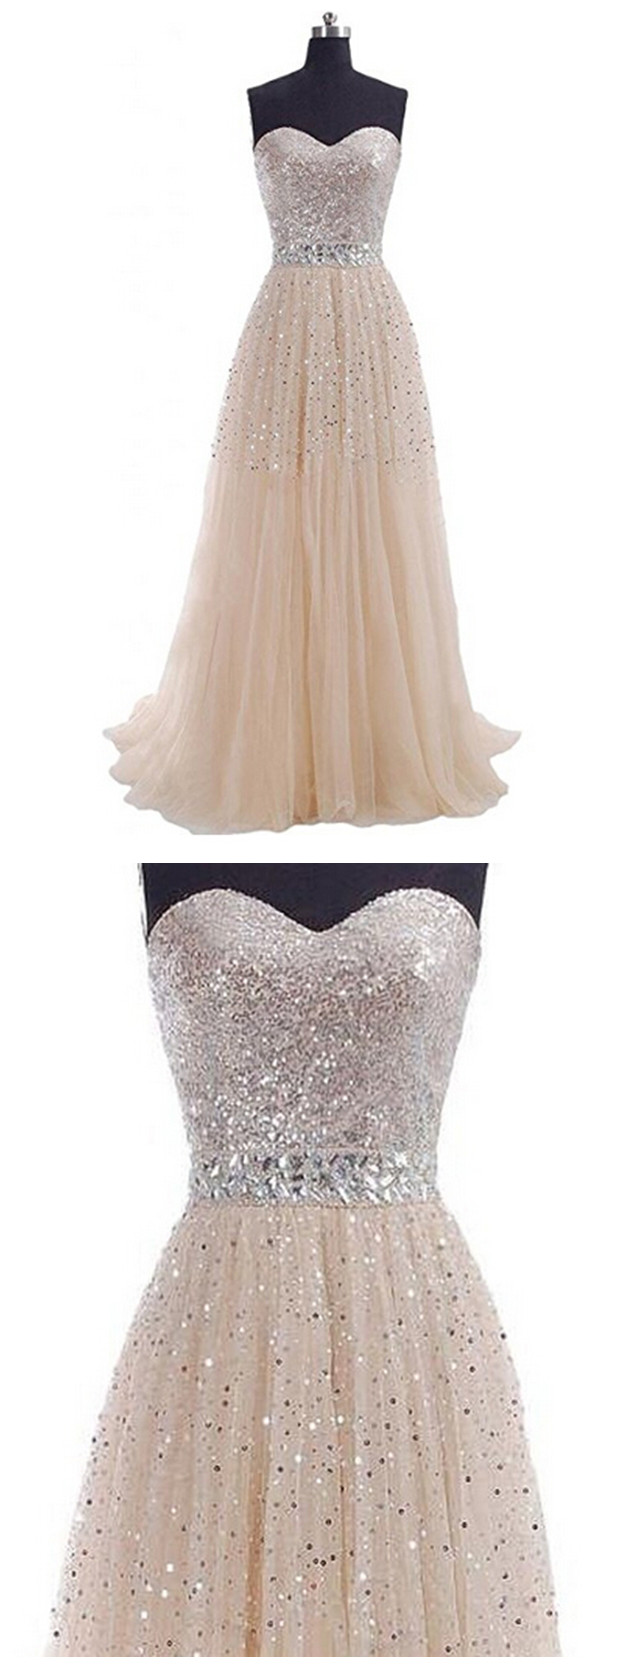 Women's Exquisite Tulle Prom Dresses Sweetheart Party Gowns Sequins A-line Prom Gown Long Evening Dress